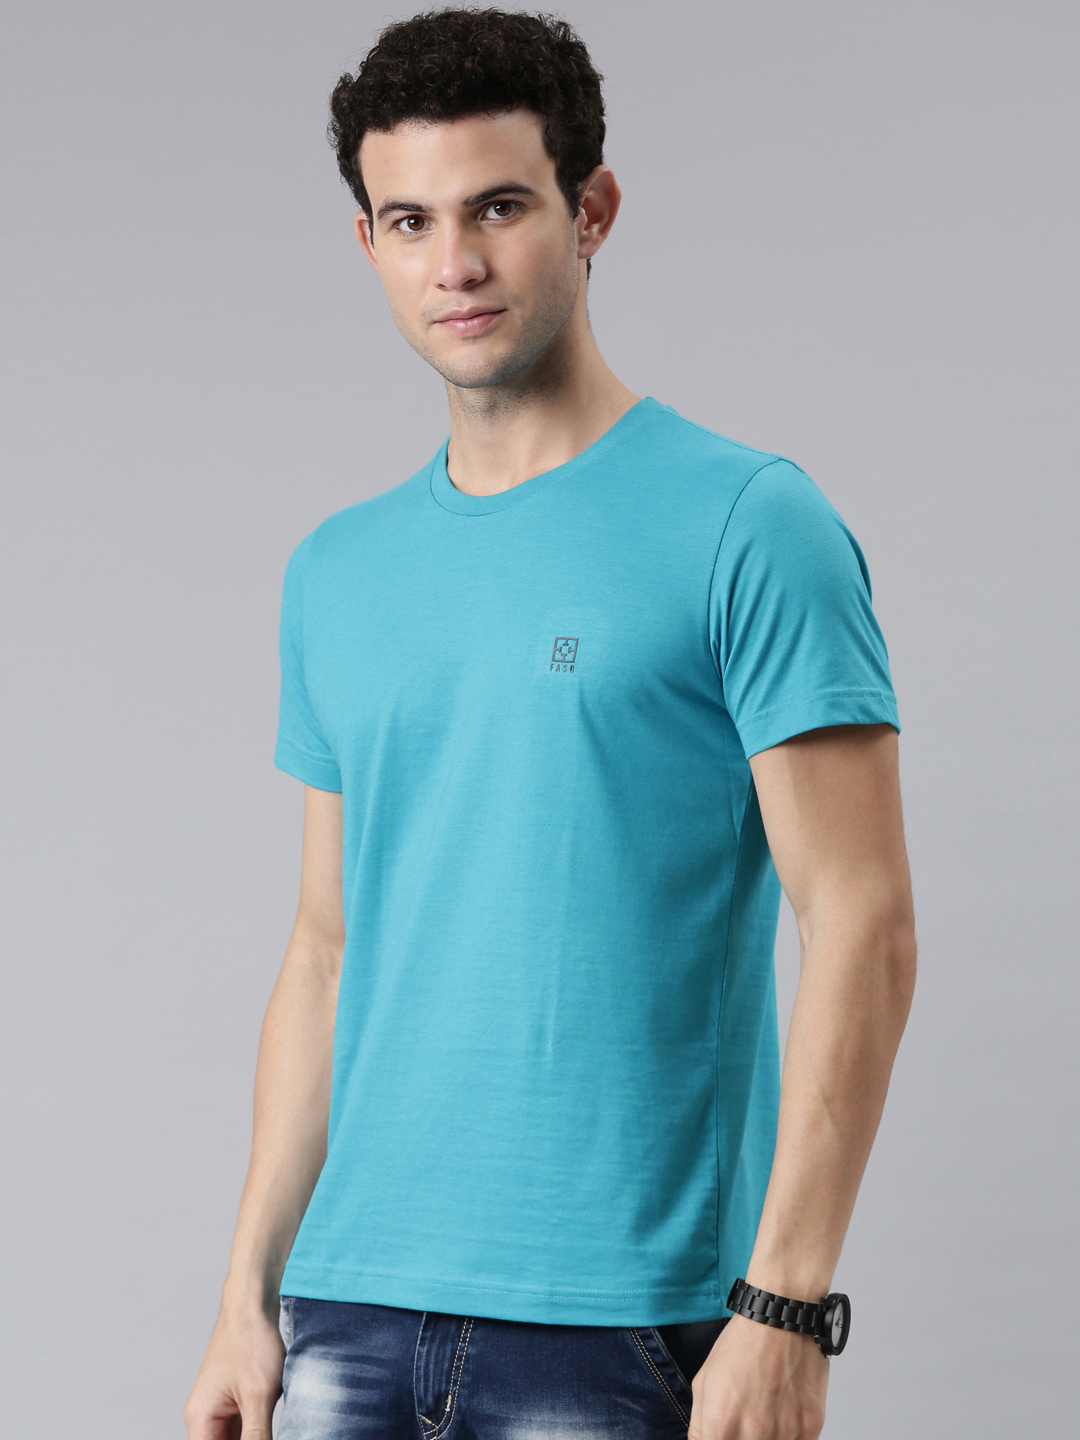 Buy Mens T-Shirts Online India, Best Branded T Shirts for Men India –